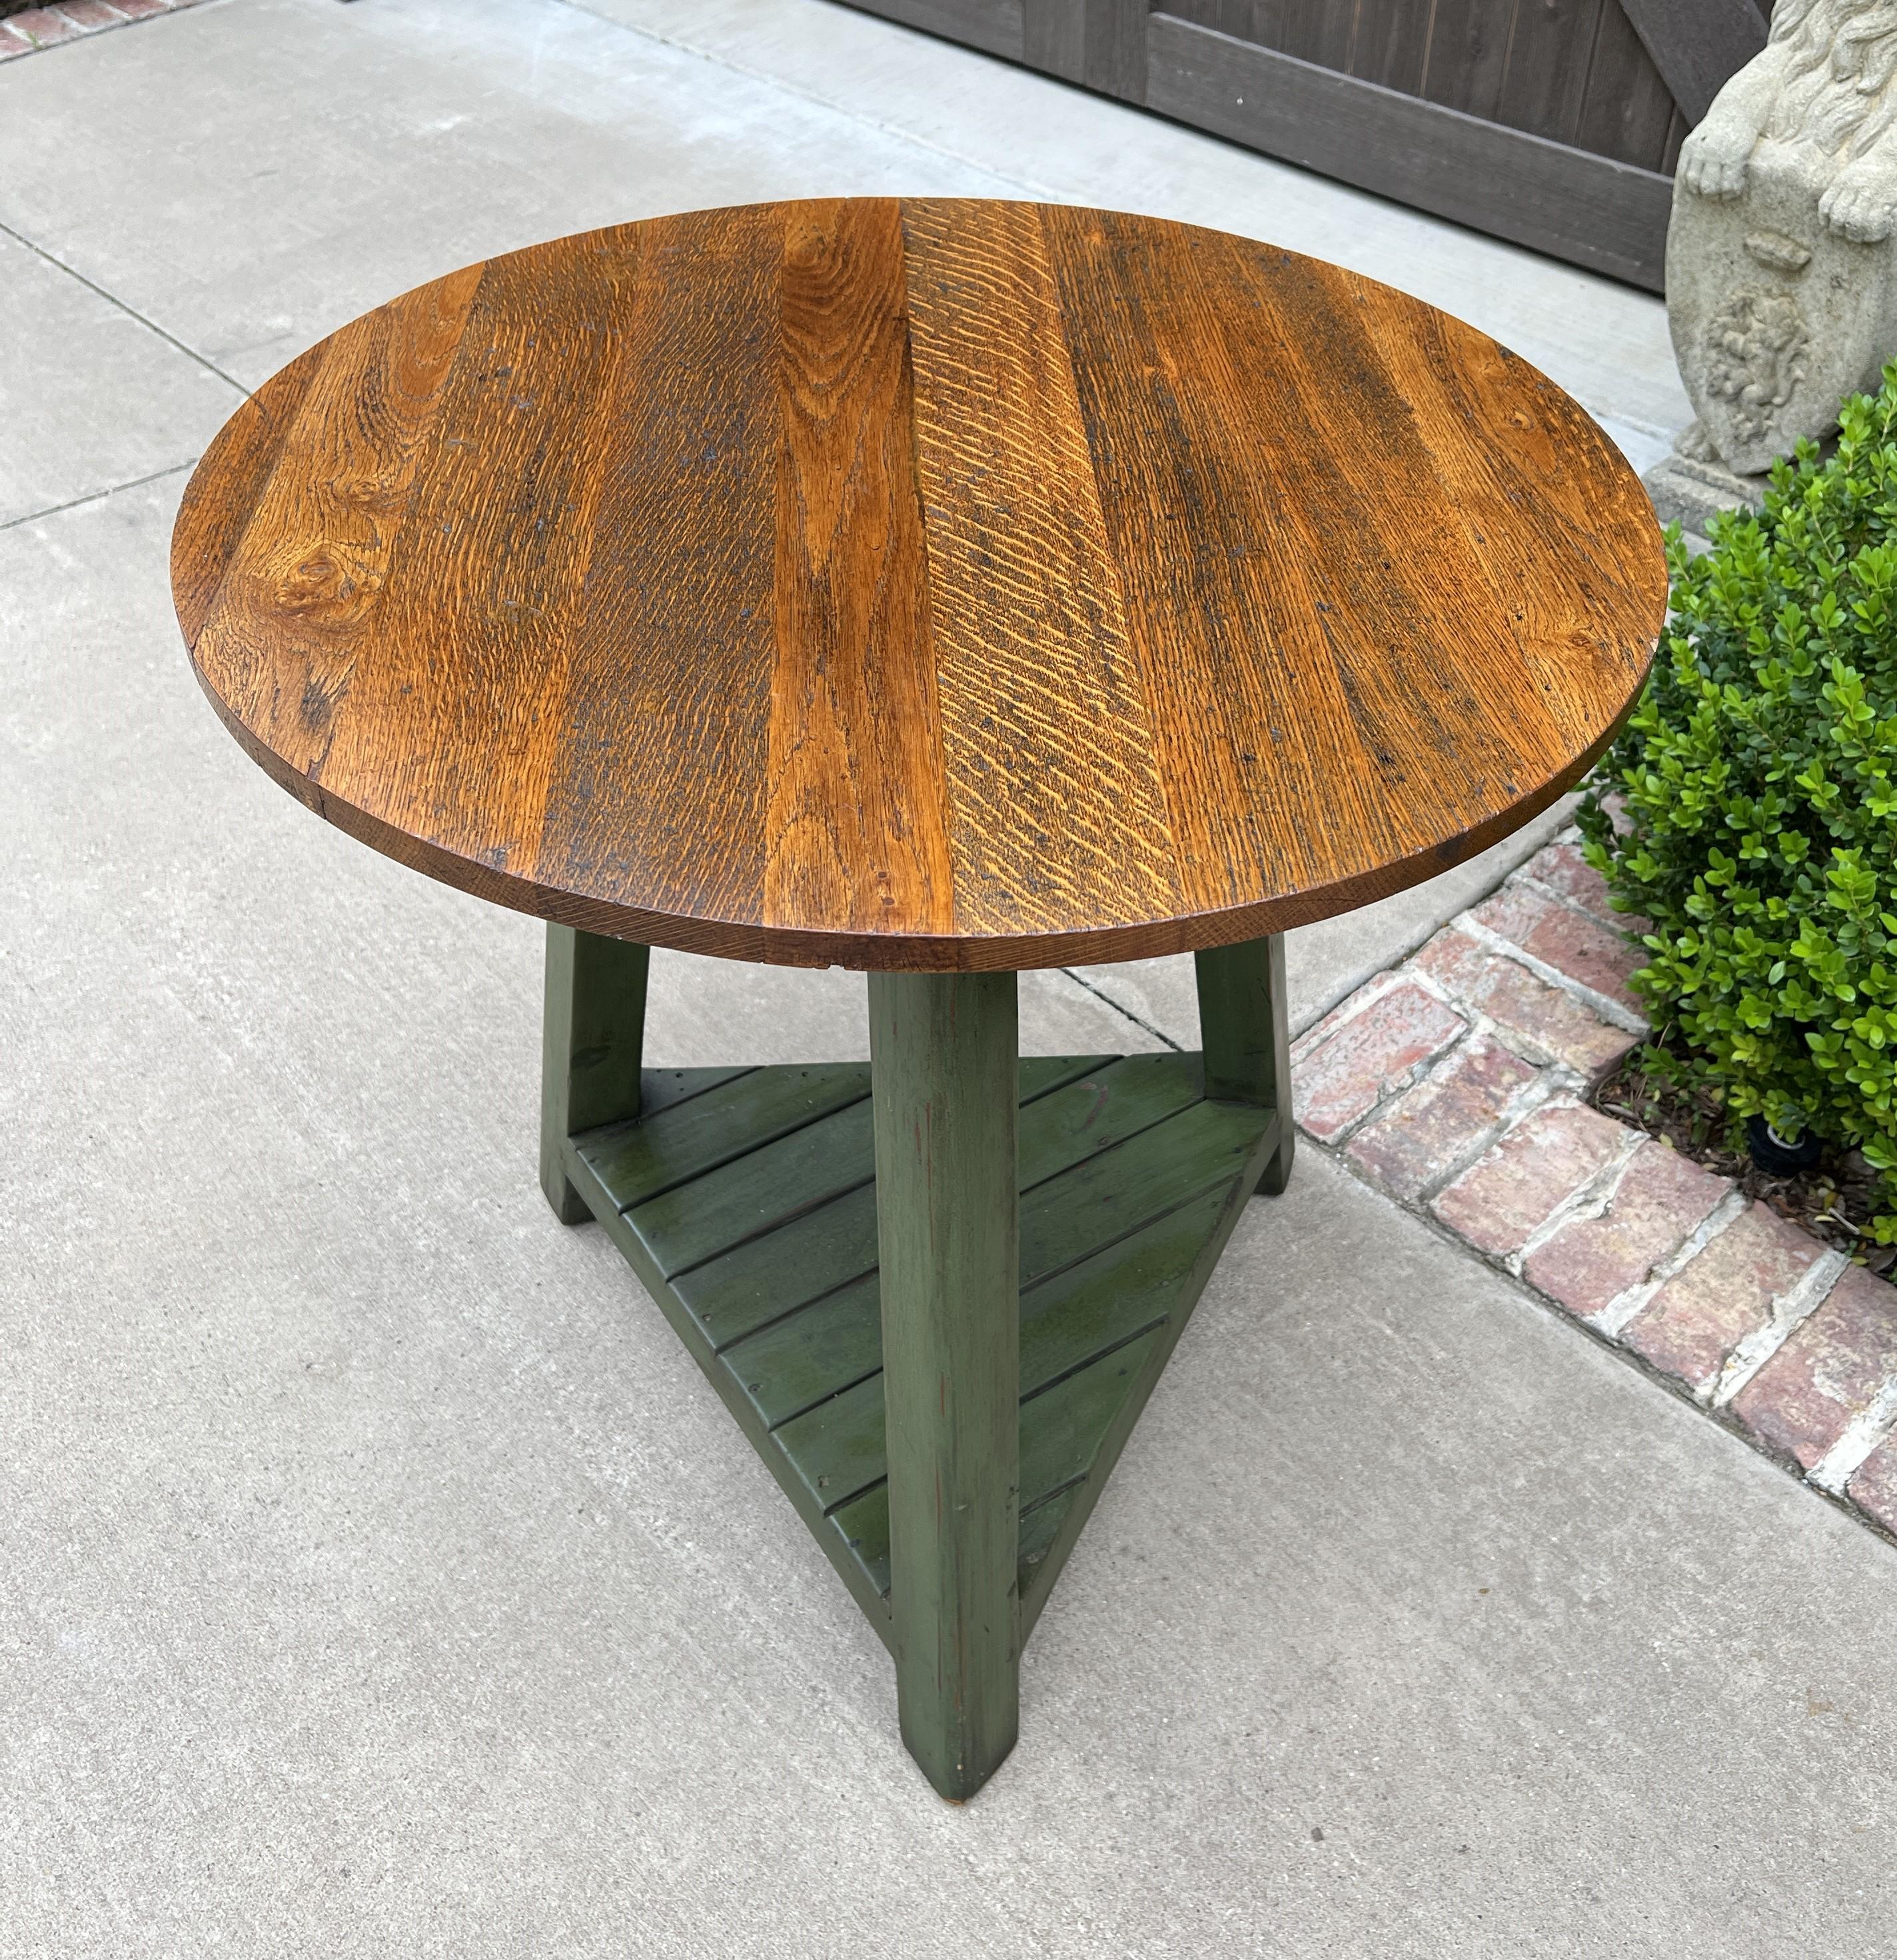 Vintage English Round Cricket Table End Table Side Table Oak 3-Legged Green Base In Good Condition For Sale In Tyler, TX